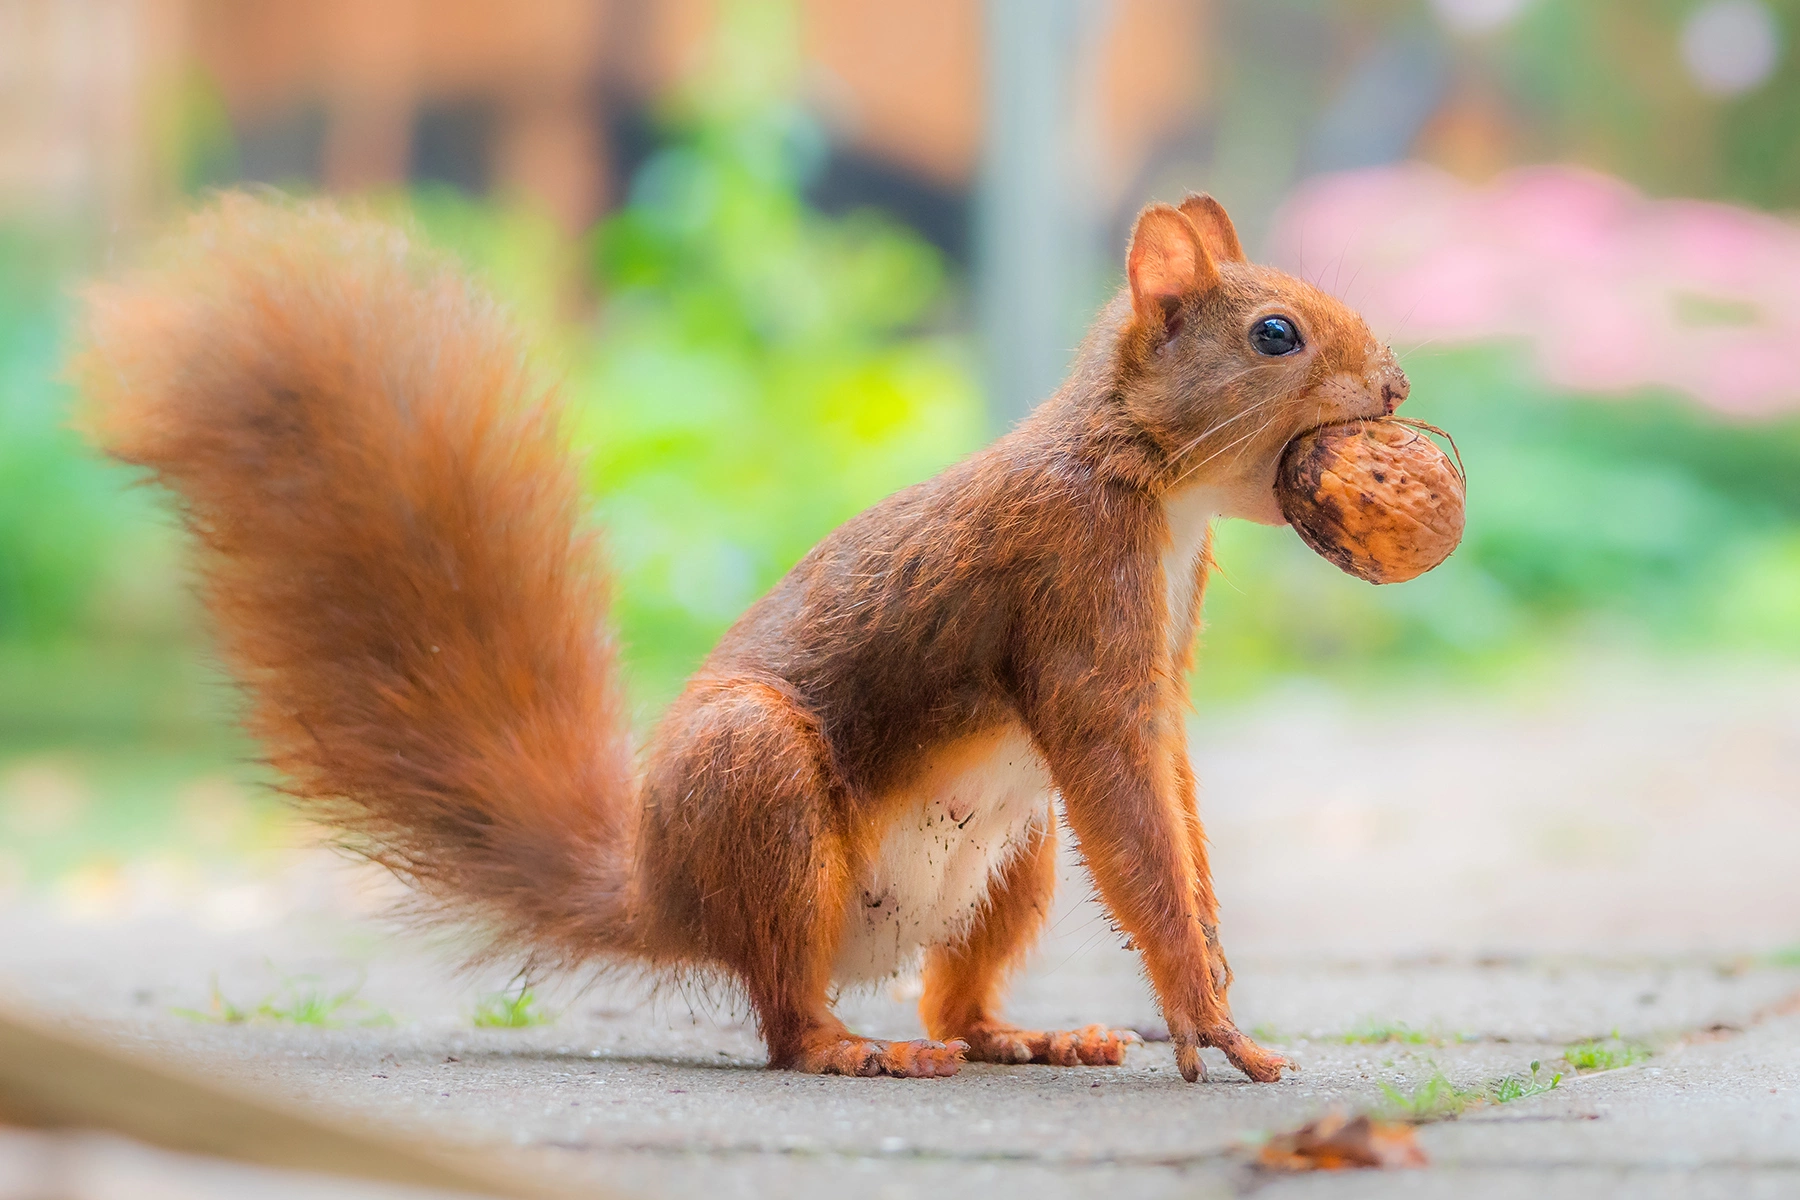 A red squirrel with an acorn in its mouth